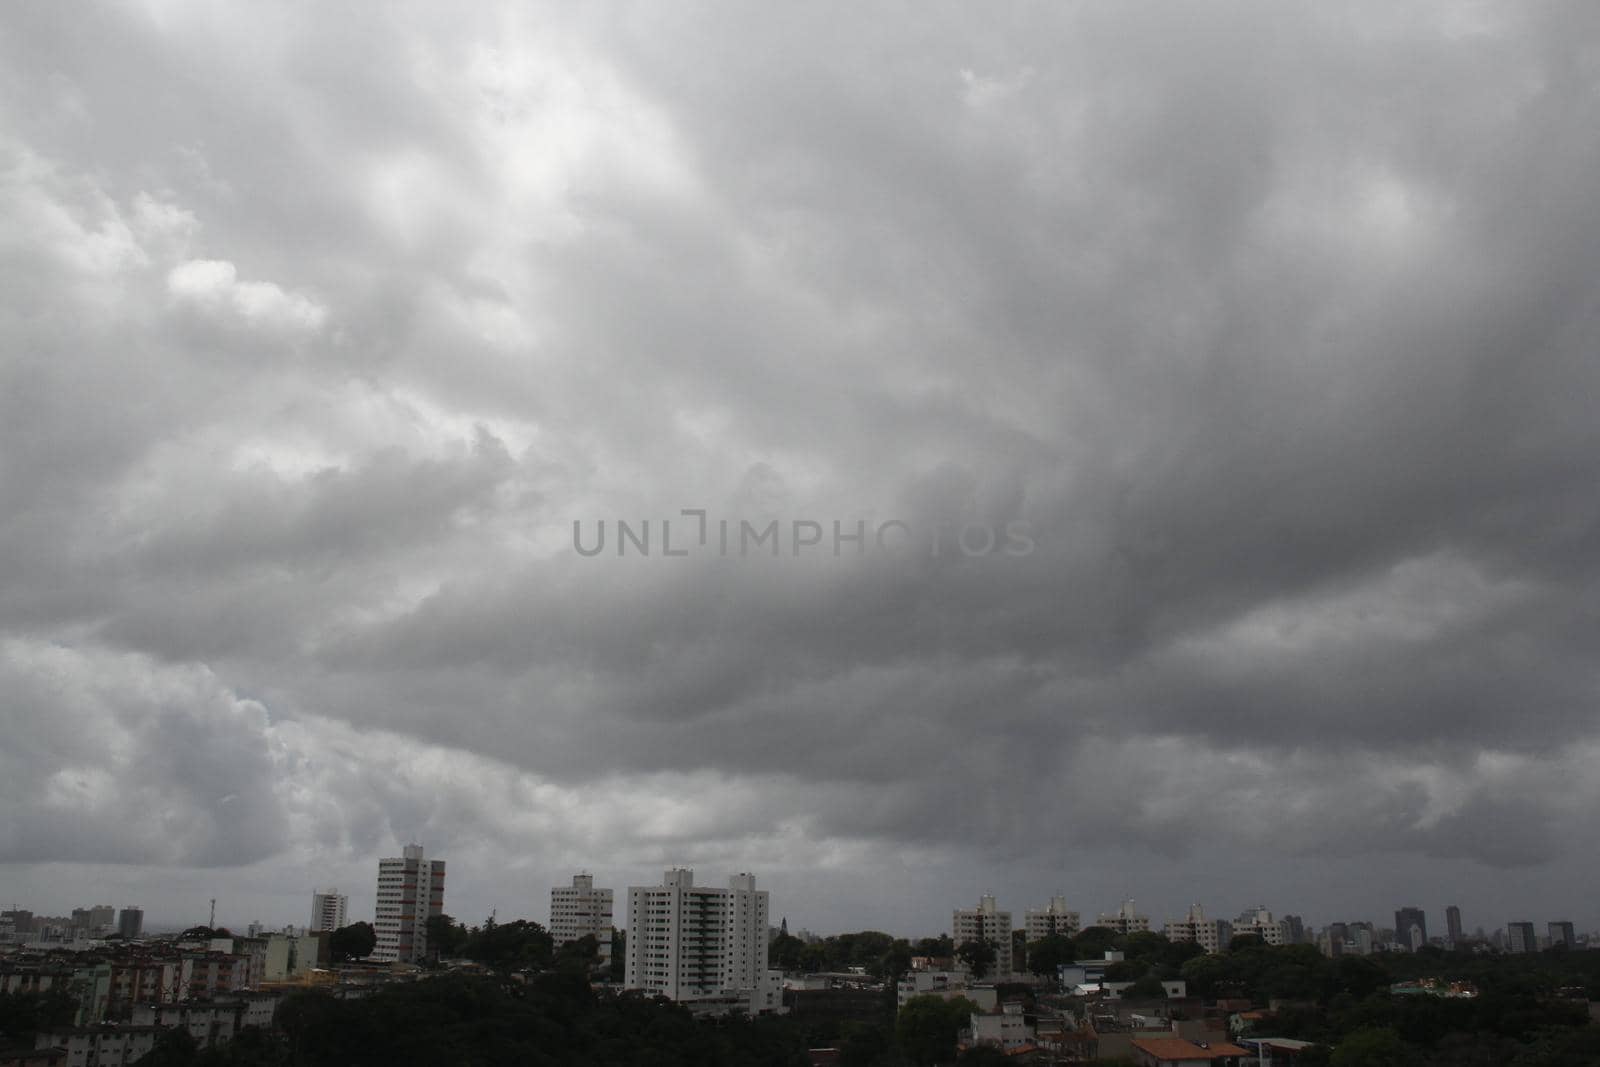 salvador, bahia / brazil -  november 13, 2013: Sky with rain clouds is seen in the city of Salvador